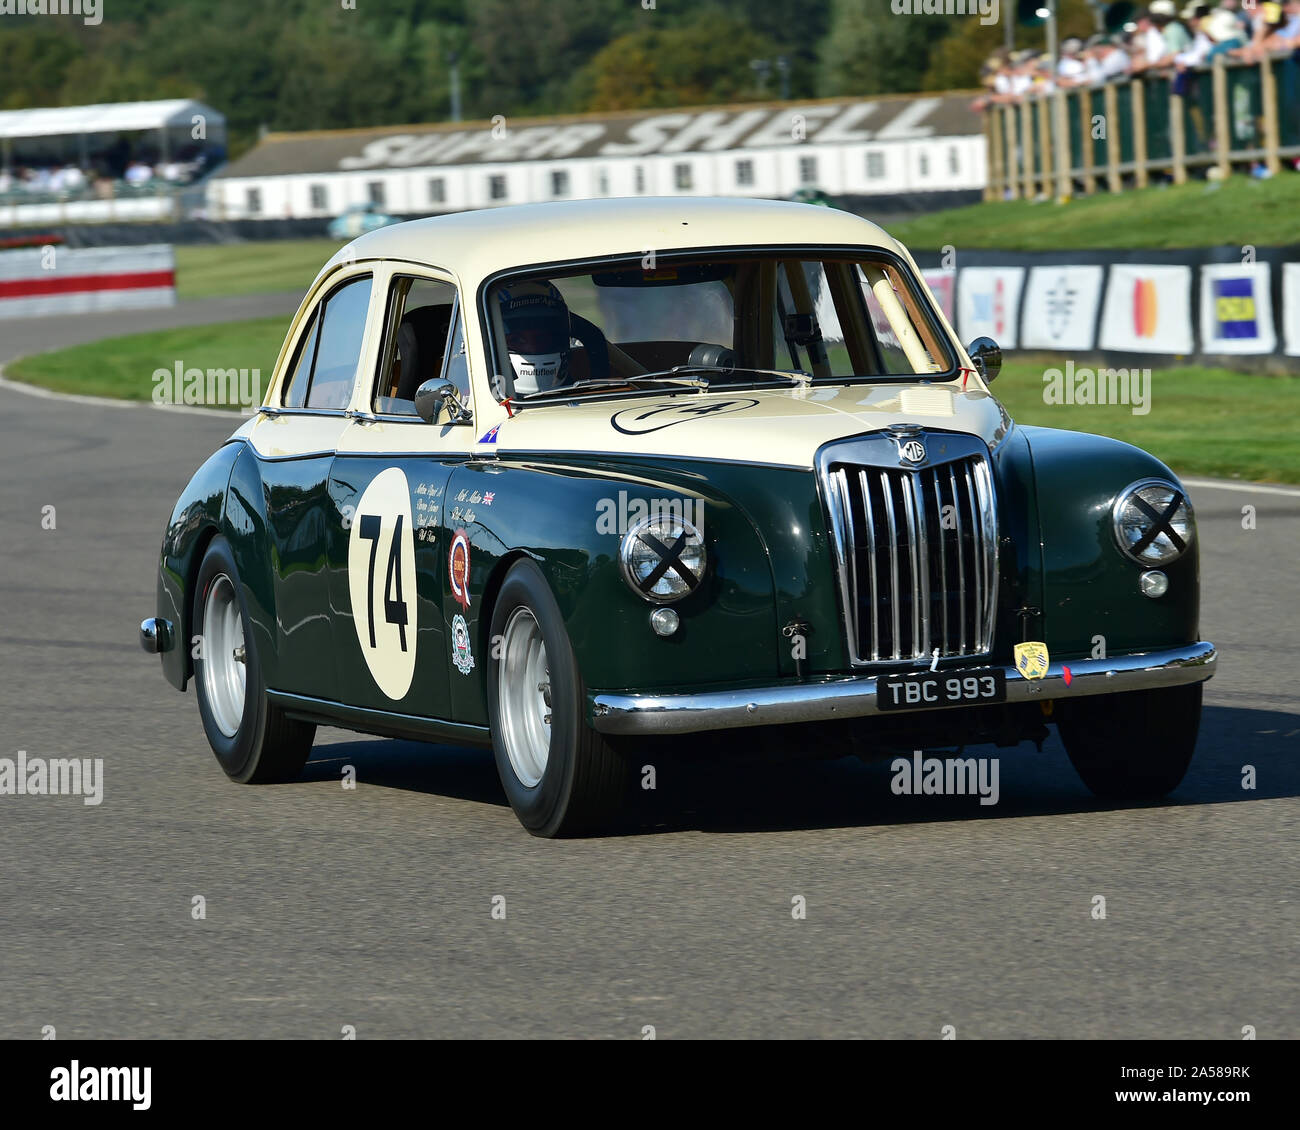 Nick Maton, Darren Turner, MG Magnette ZB, St Marys Trophy, production saloon cars, 1960 to 1966, Goodwood Revival 2019, September 2019, automobiles, Stock Photo